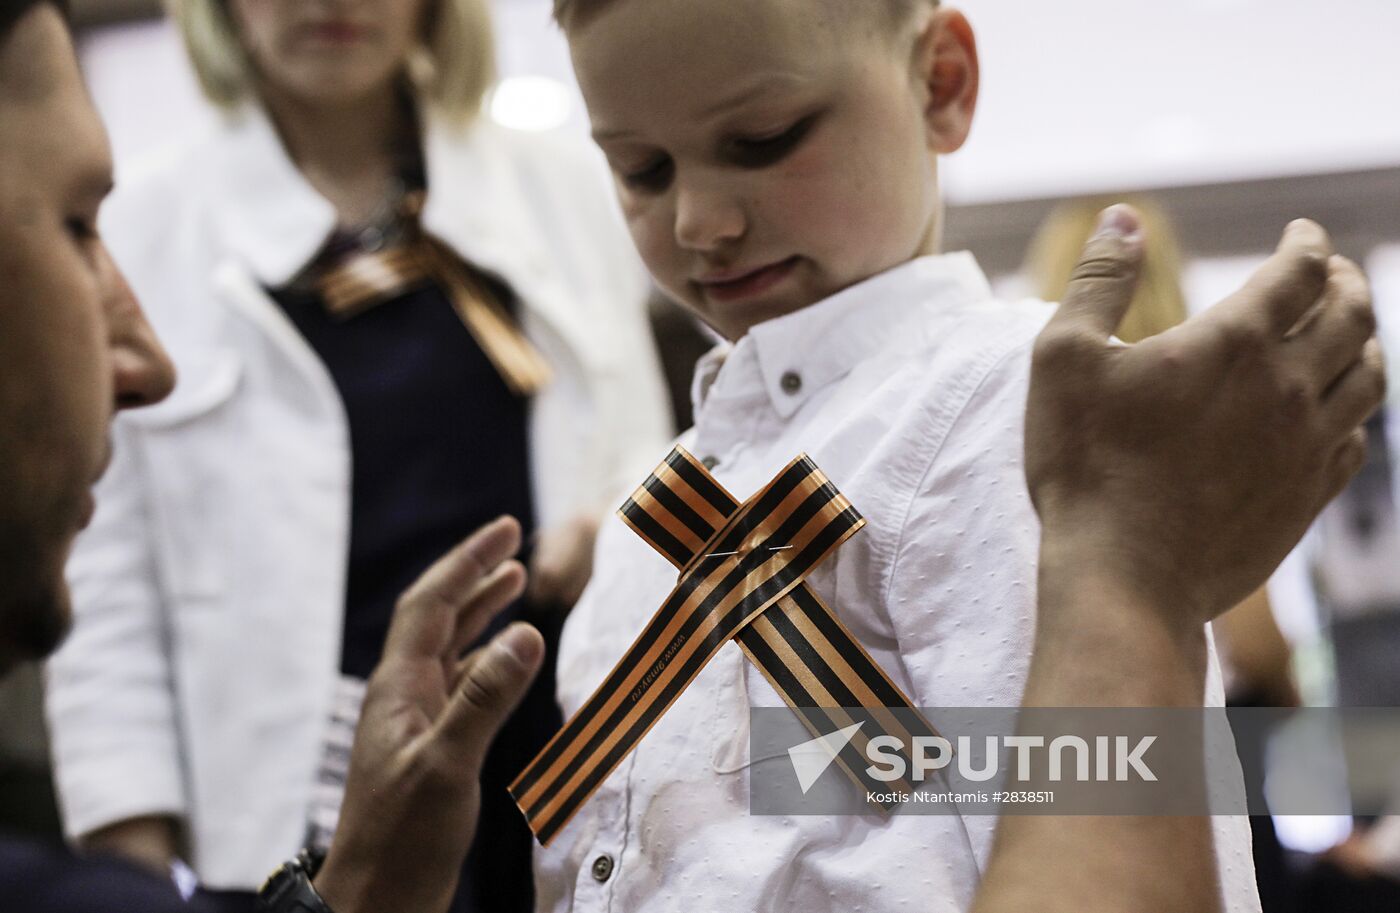 St. George's Ribbon campaign launched in Athens